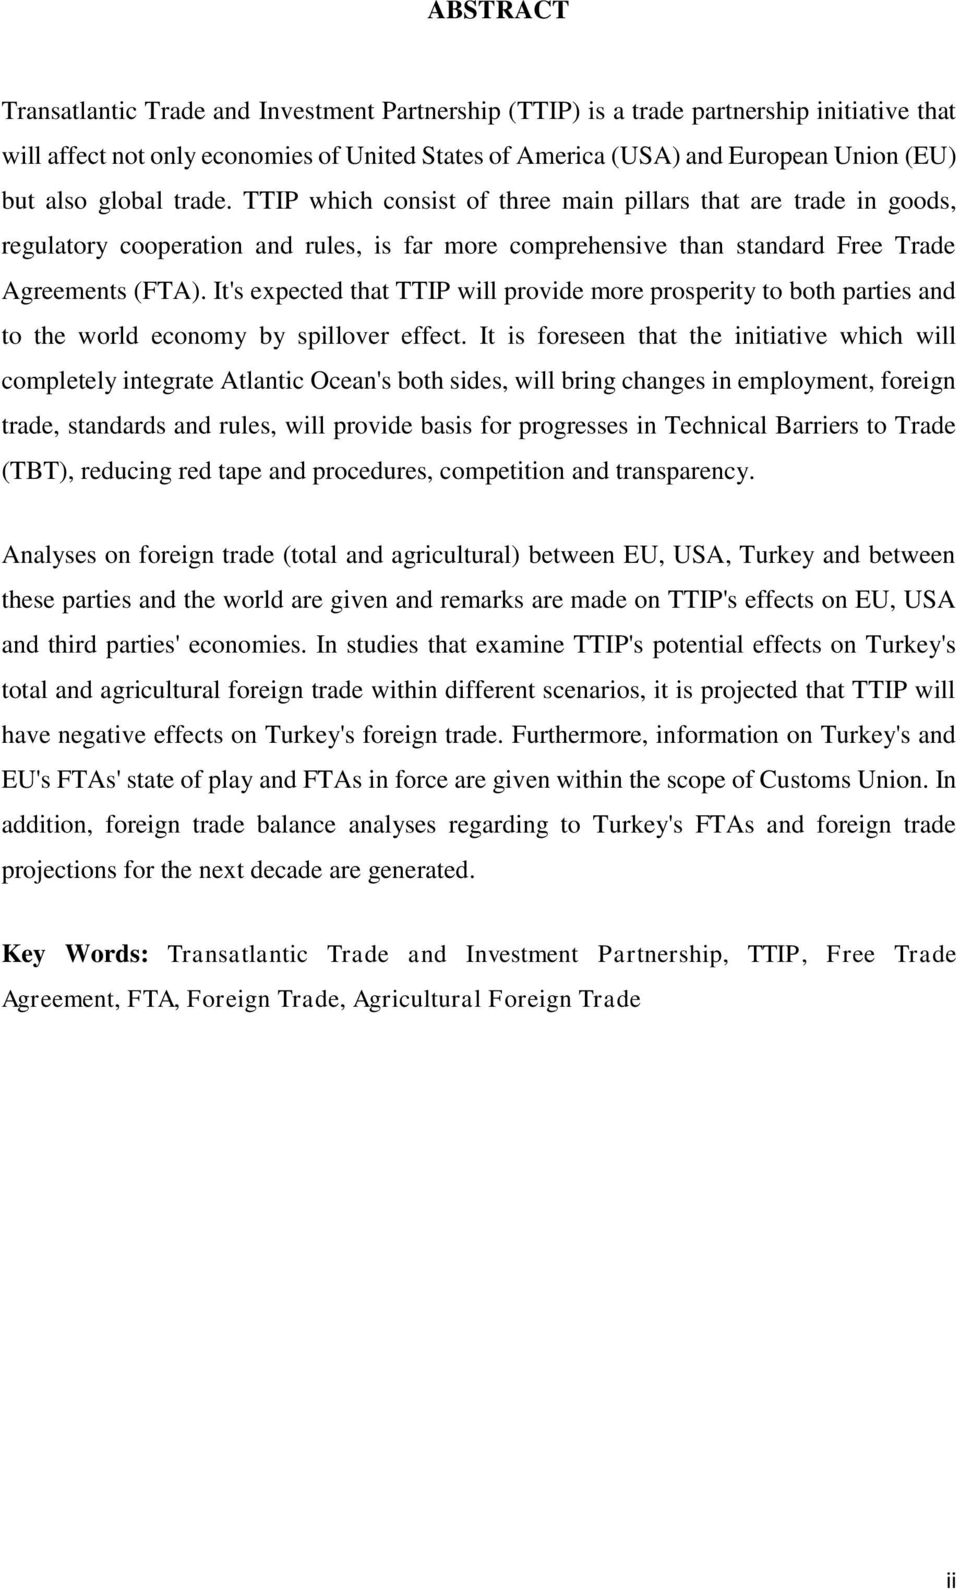 It's expected that TTIP will provide more prosperity to both parties and to the world economy by spillover effect.